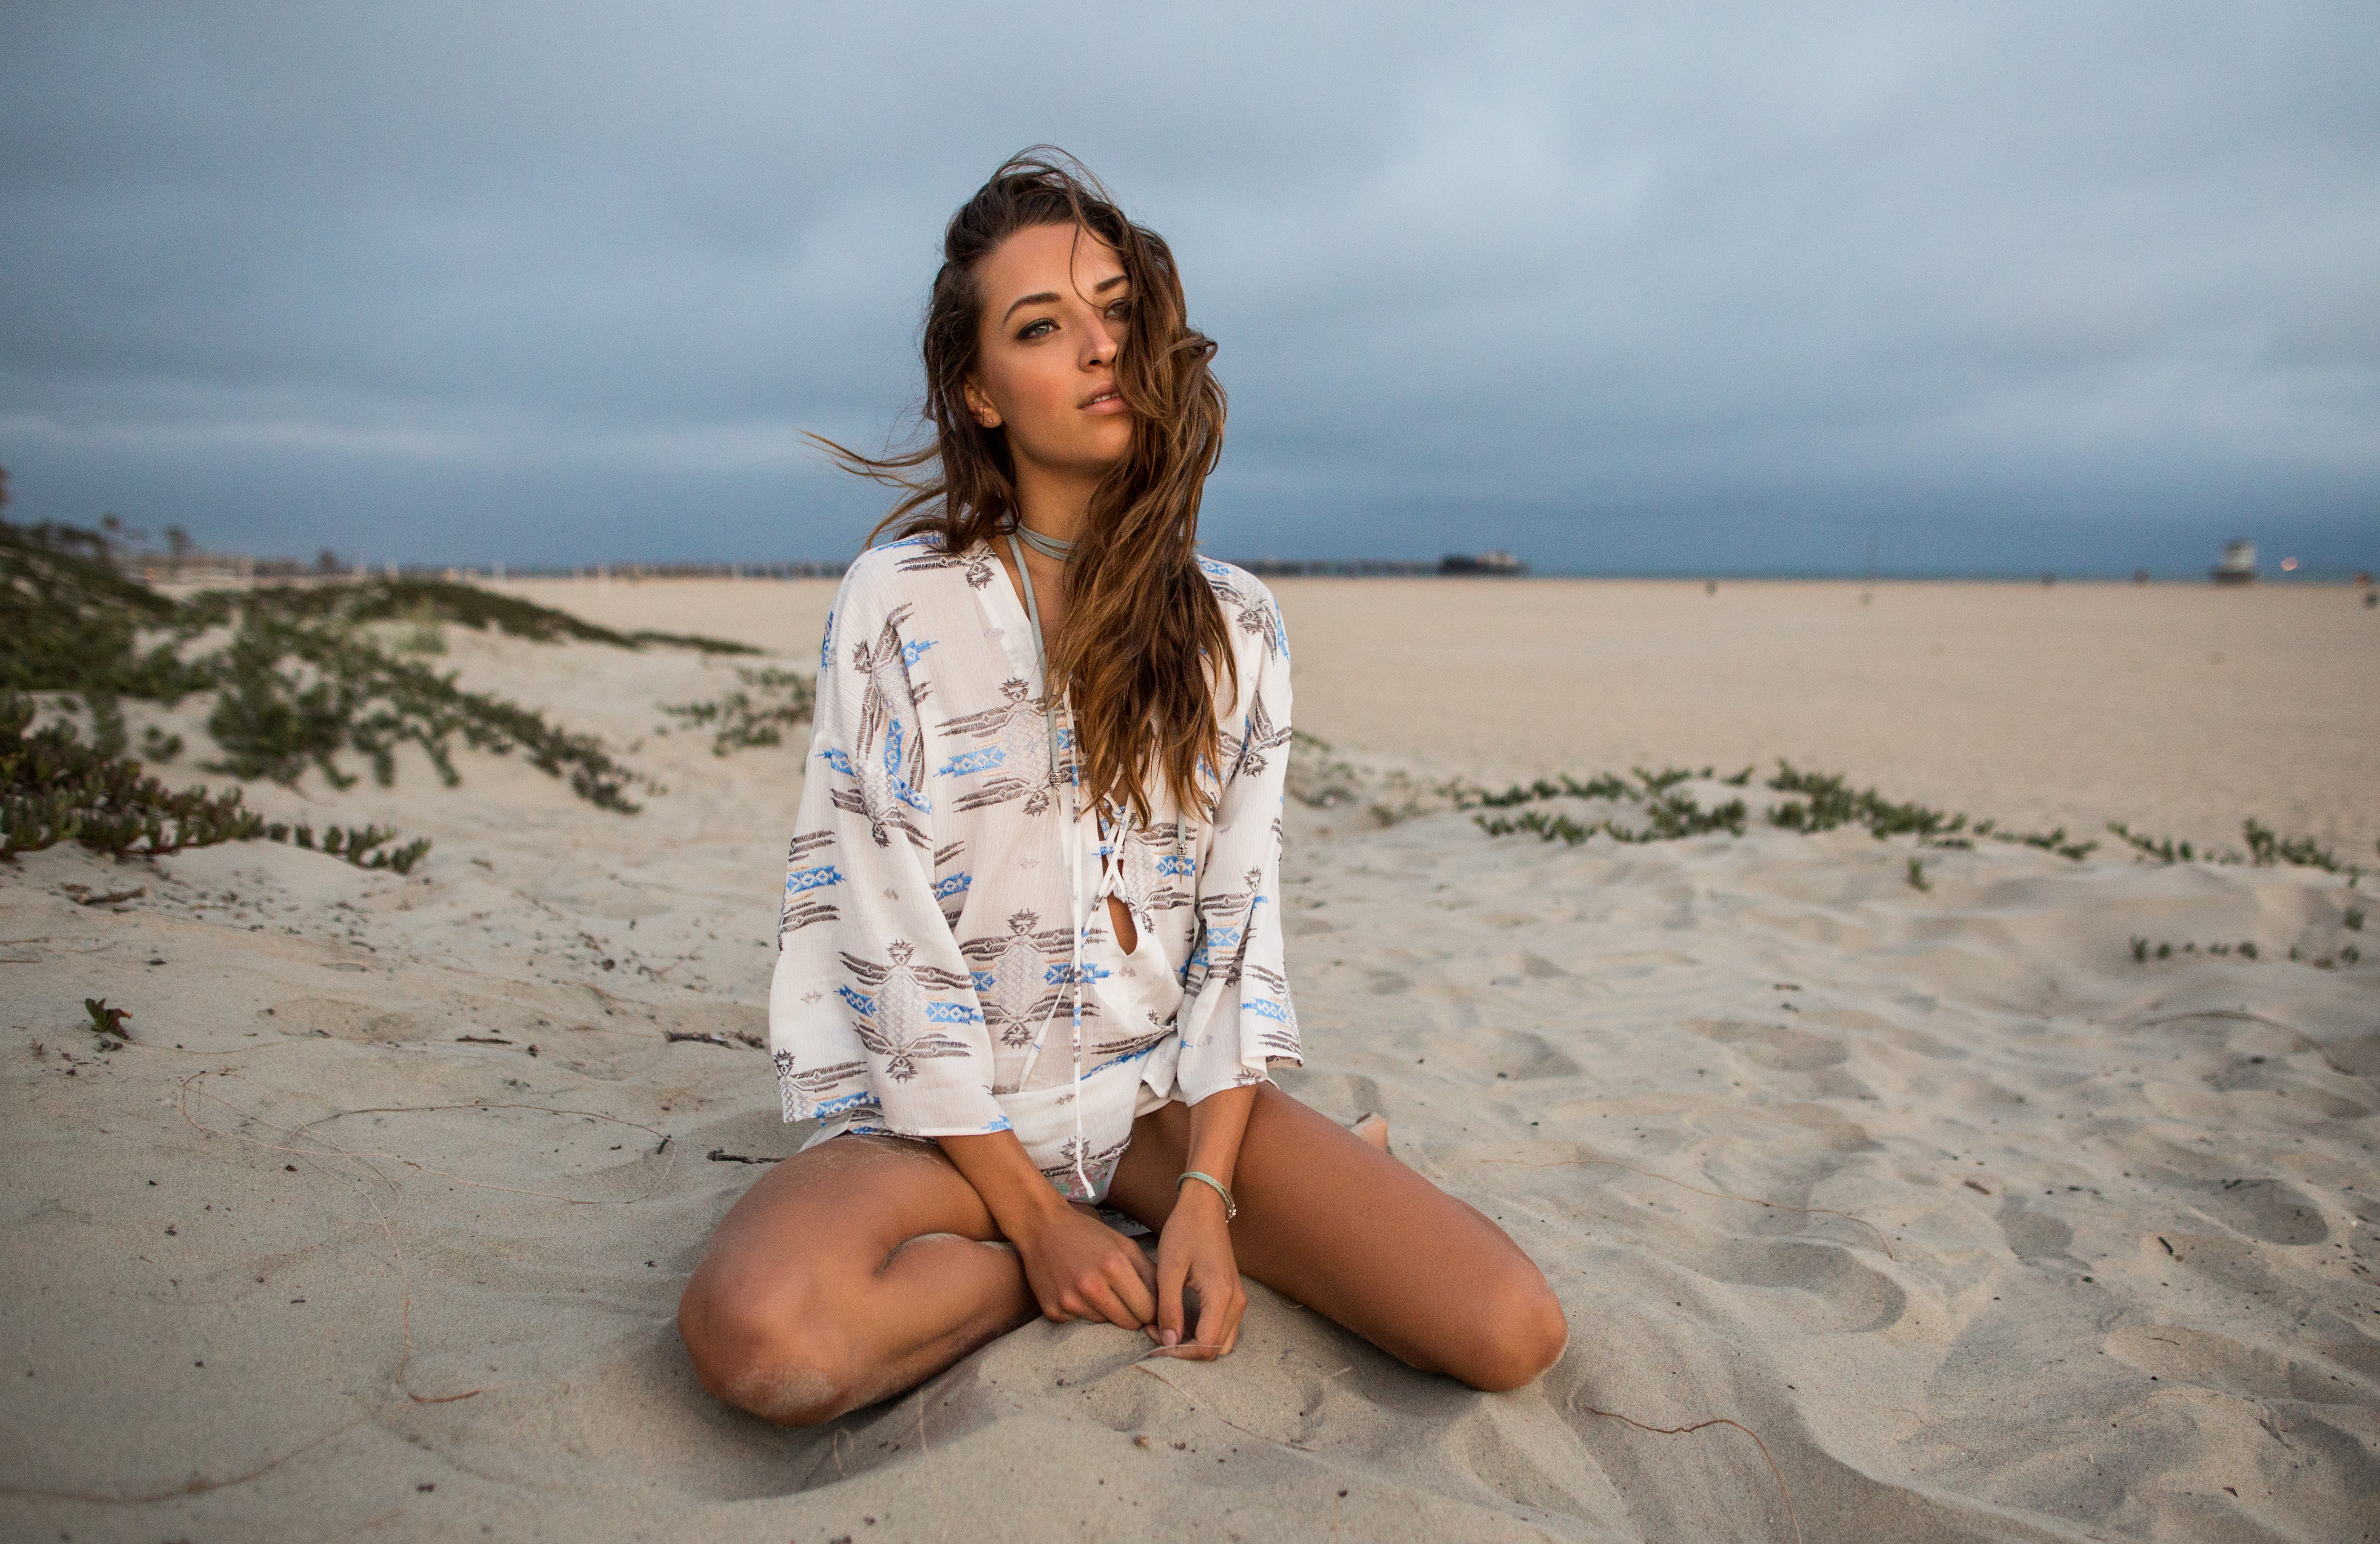 Fashion Editorial on the beach: native wishes. Photos by Samuel.Black